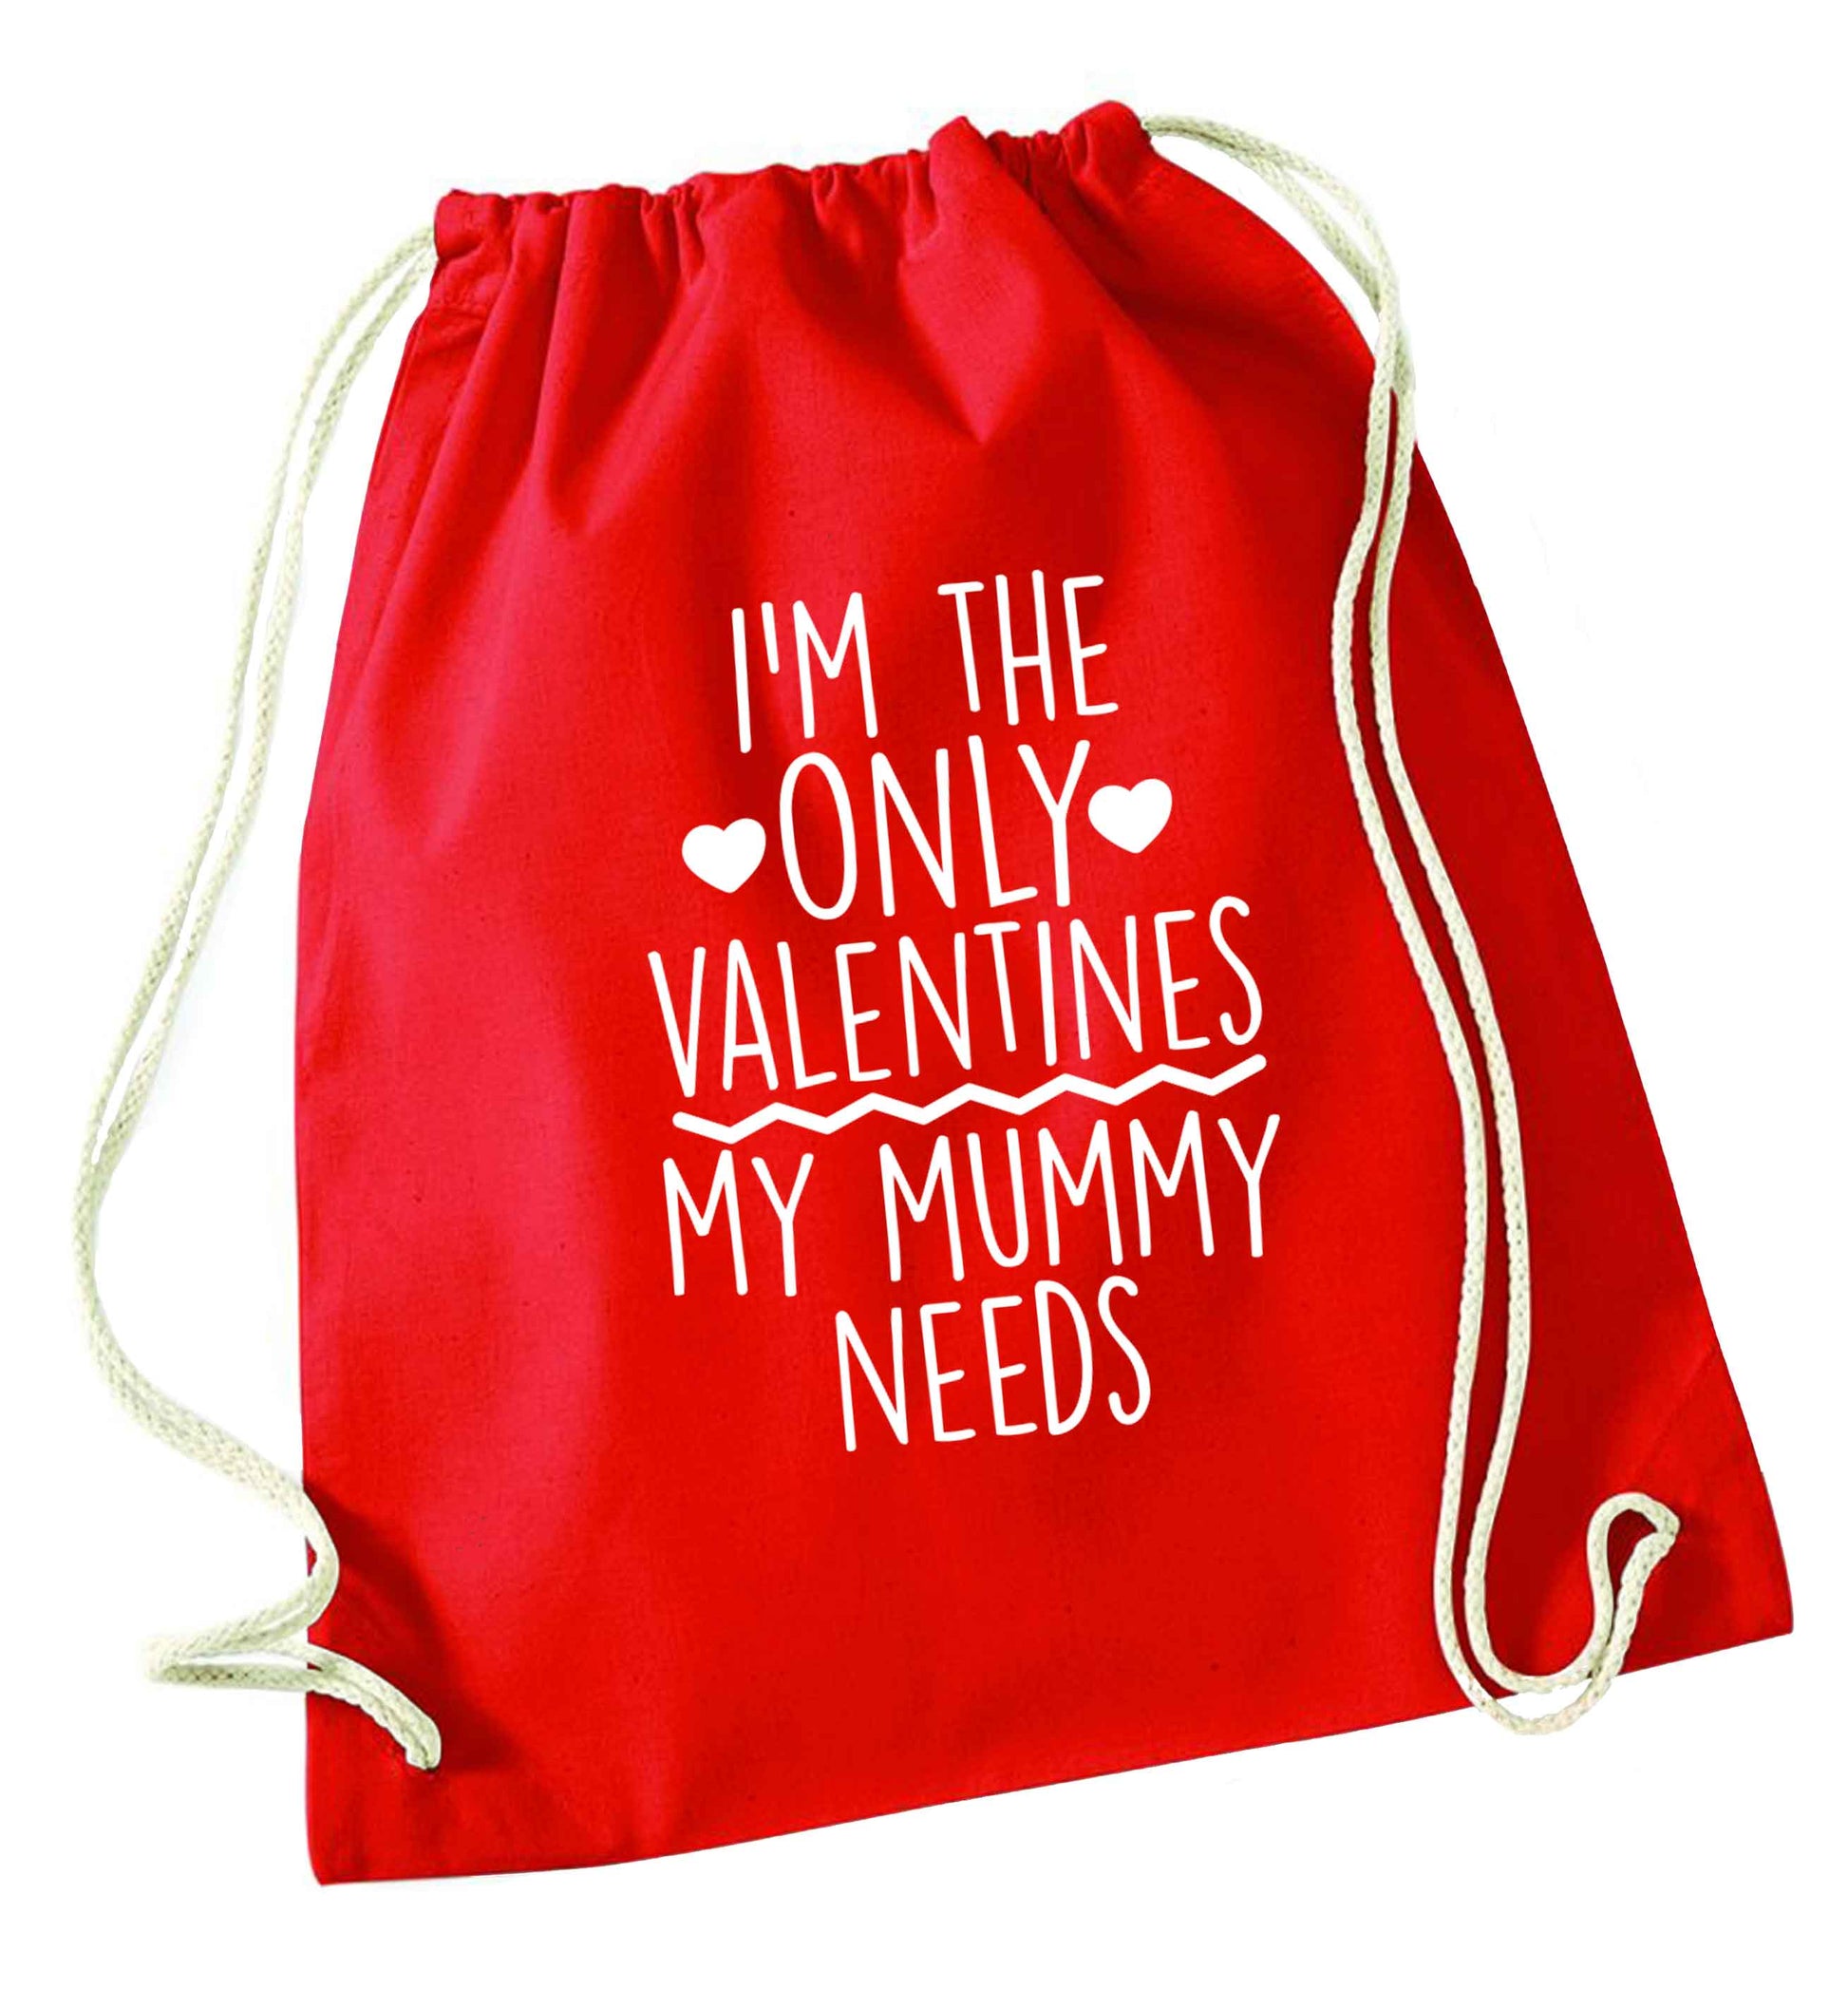 I'm the only valentines my mummy needs red drawstring bag 